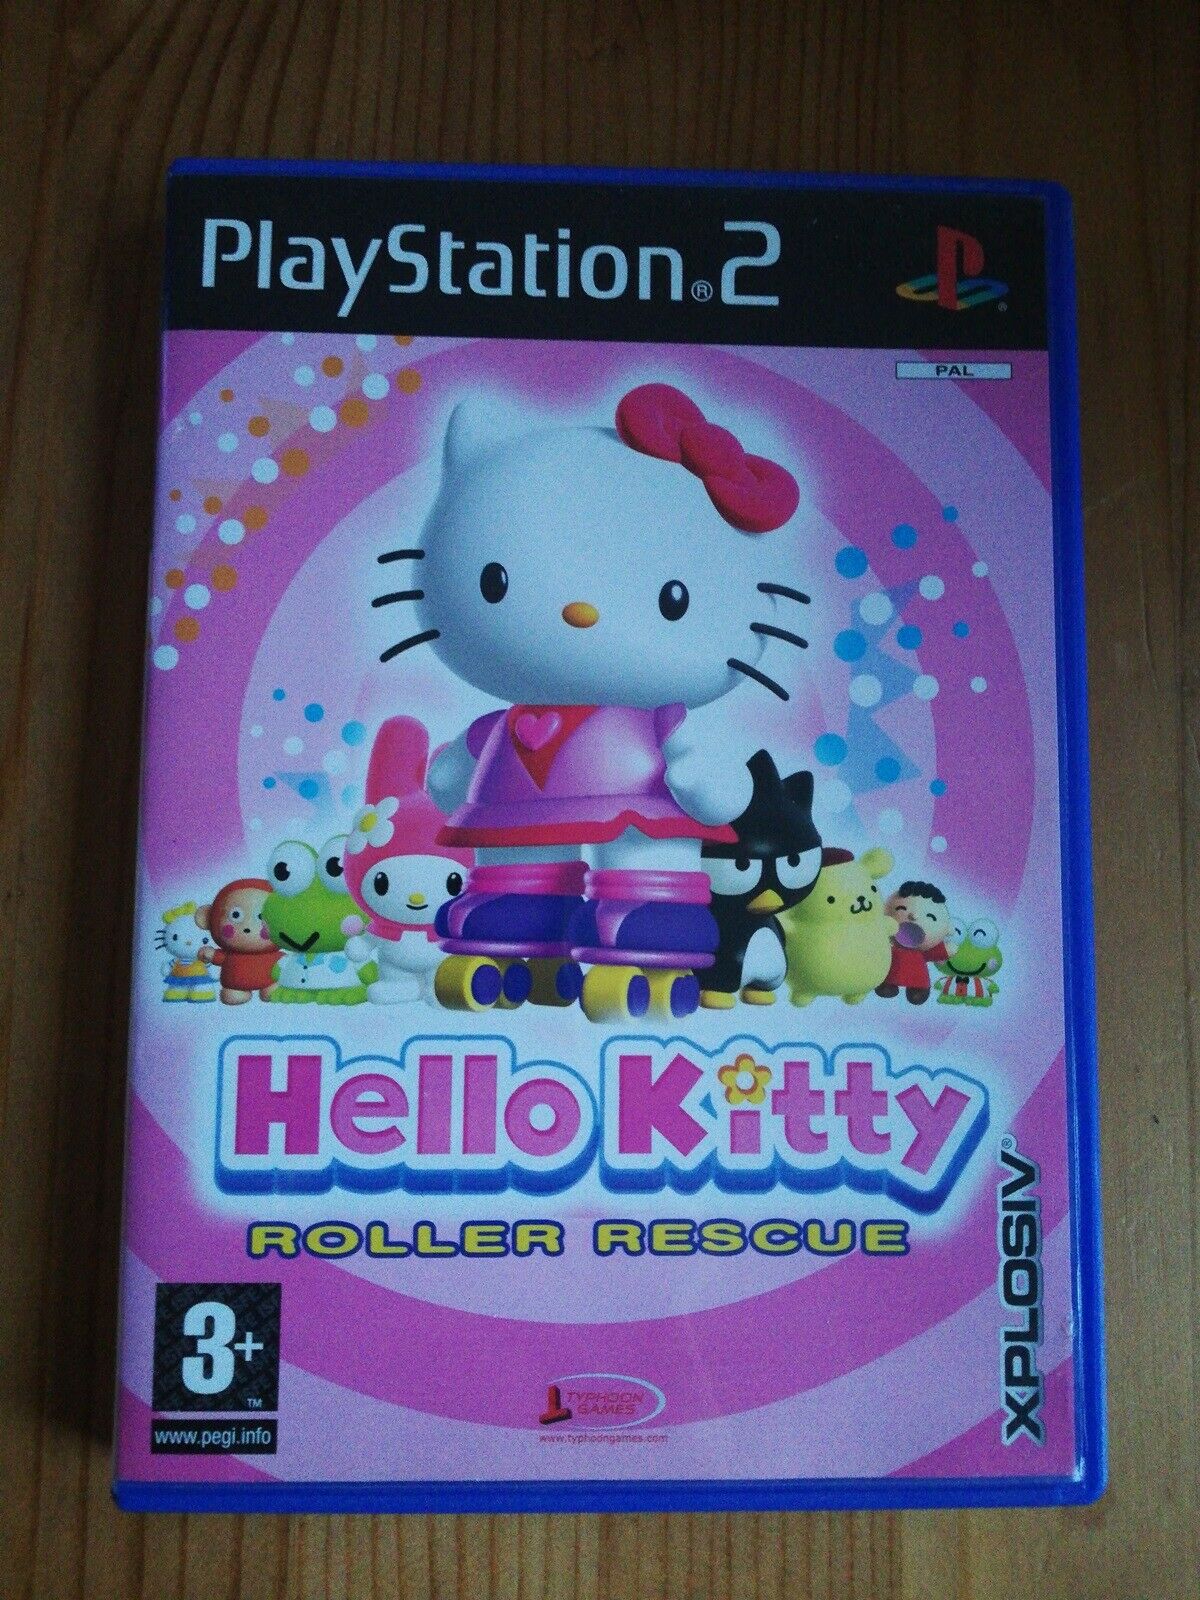 Hello kitty, PS2, anden genre